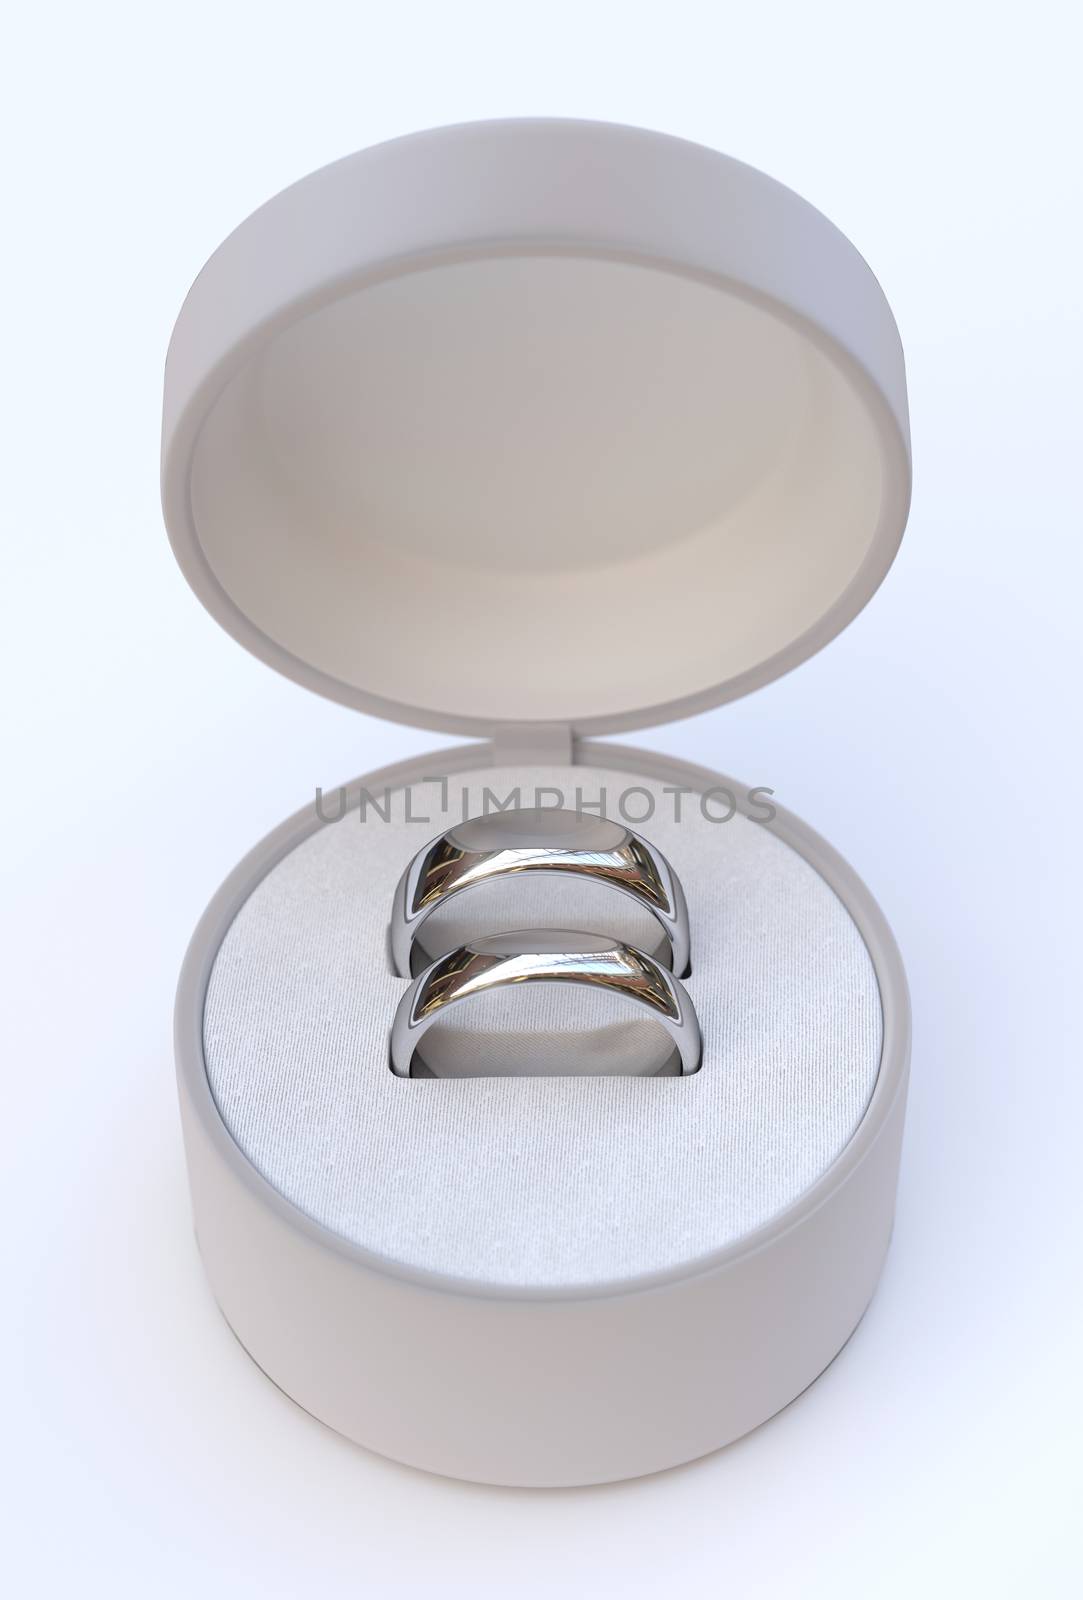 Luxury Couple of gold wedding rings in box on white background